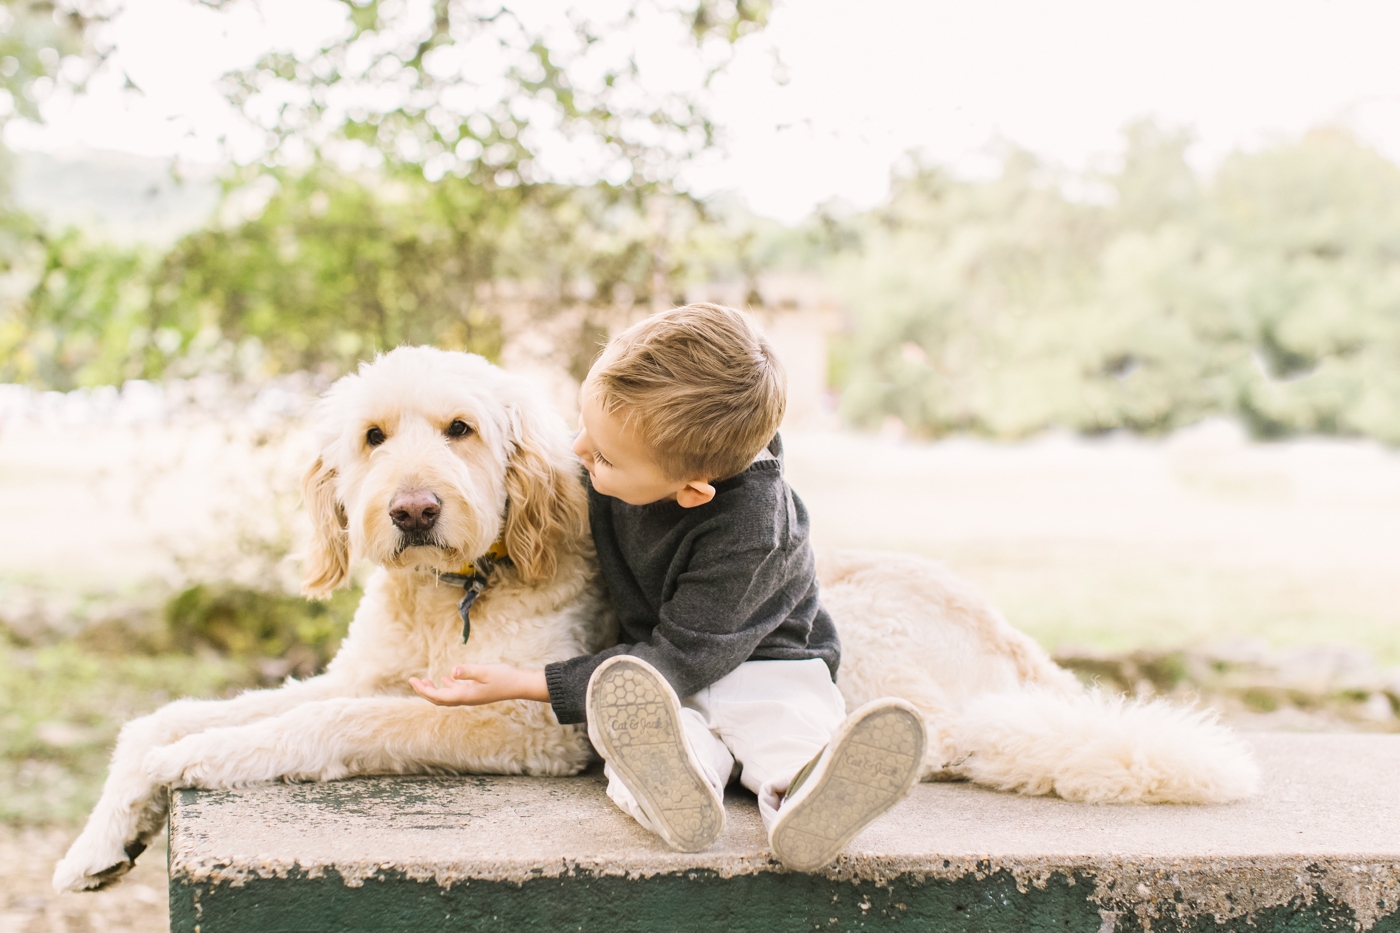 Sweet image of toddler hugging dog in park. Photo by Austin family photographer, Sana Ahmed Photography.